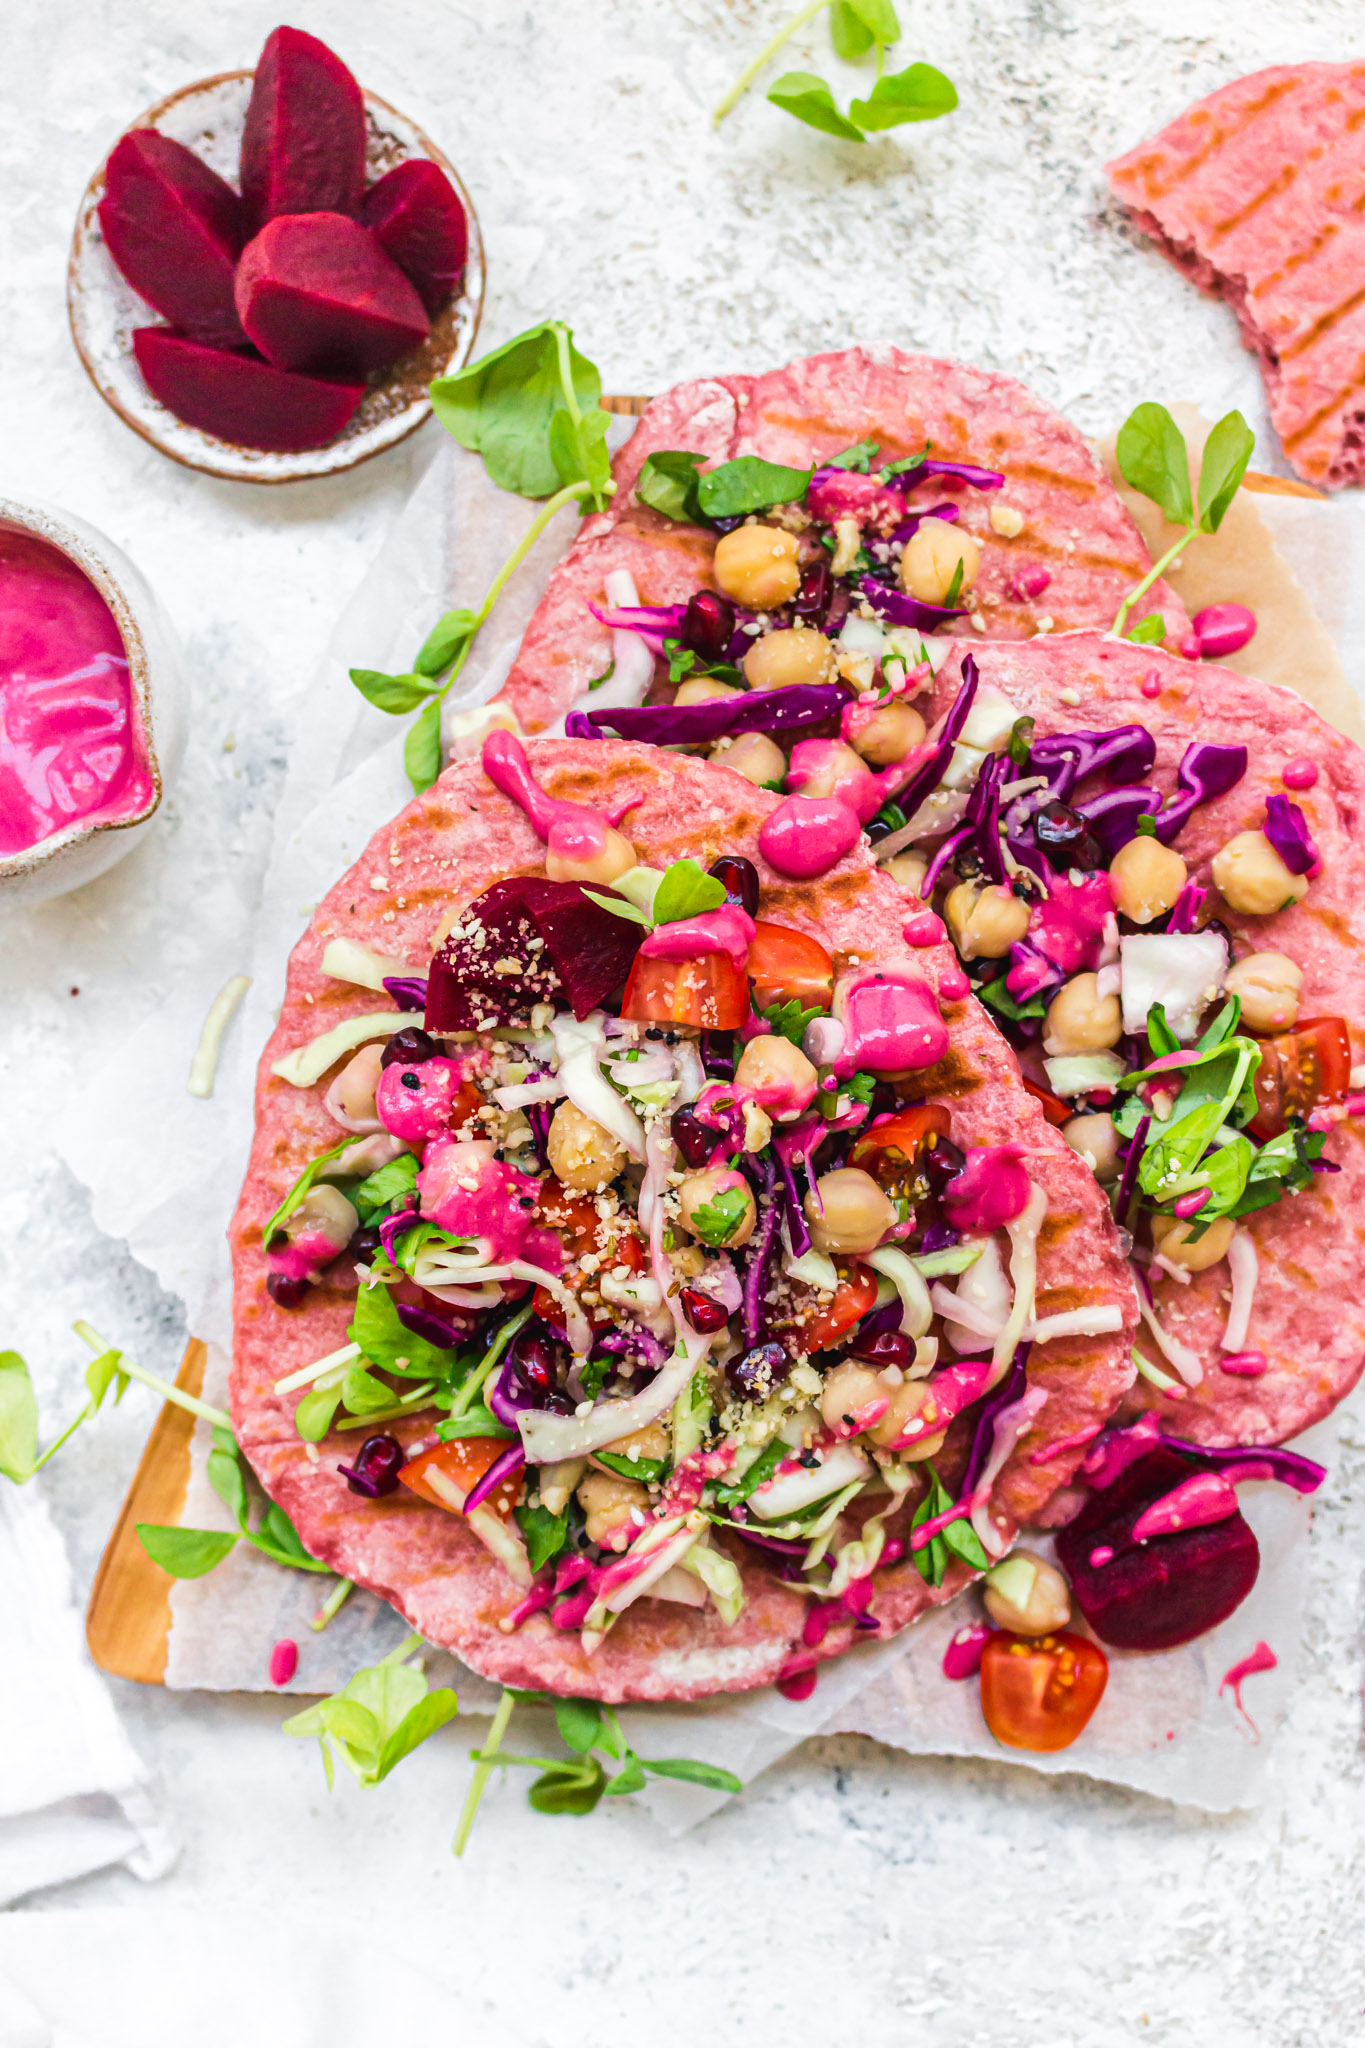 Beetroot Flatbreads with Crunchy Slaw and Chickpeas